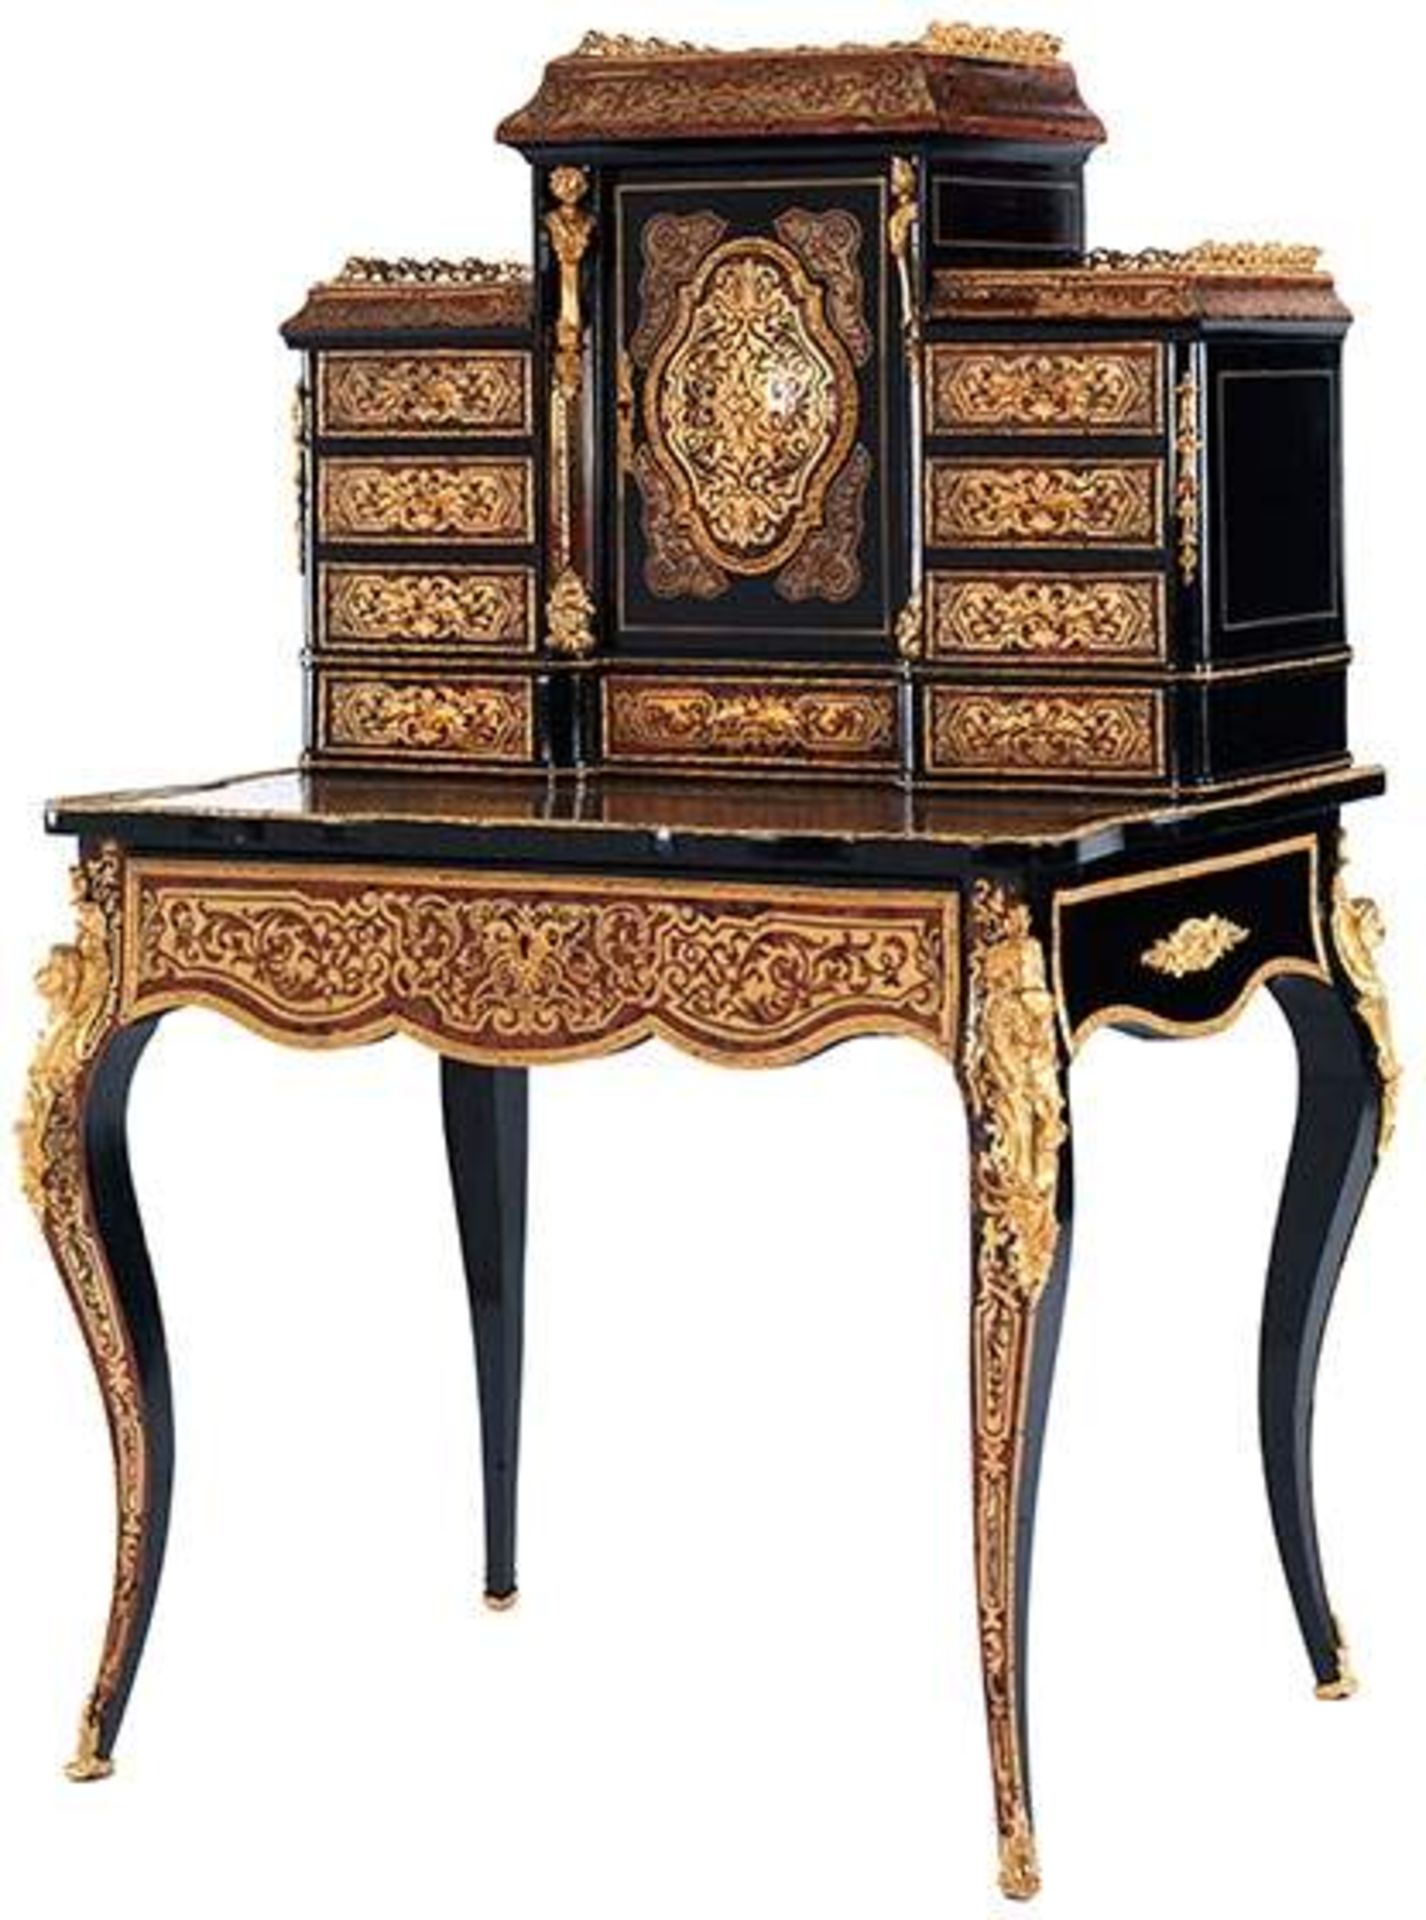 Magnificent Napoleon III bureau cabinet with Boulle-style marquetryHeight: 132 cm. Width: ca. 89 cm.